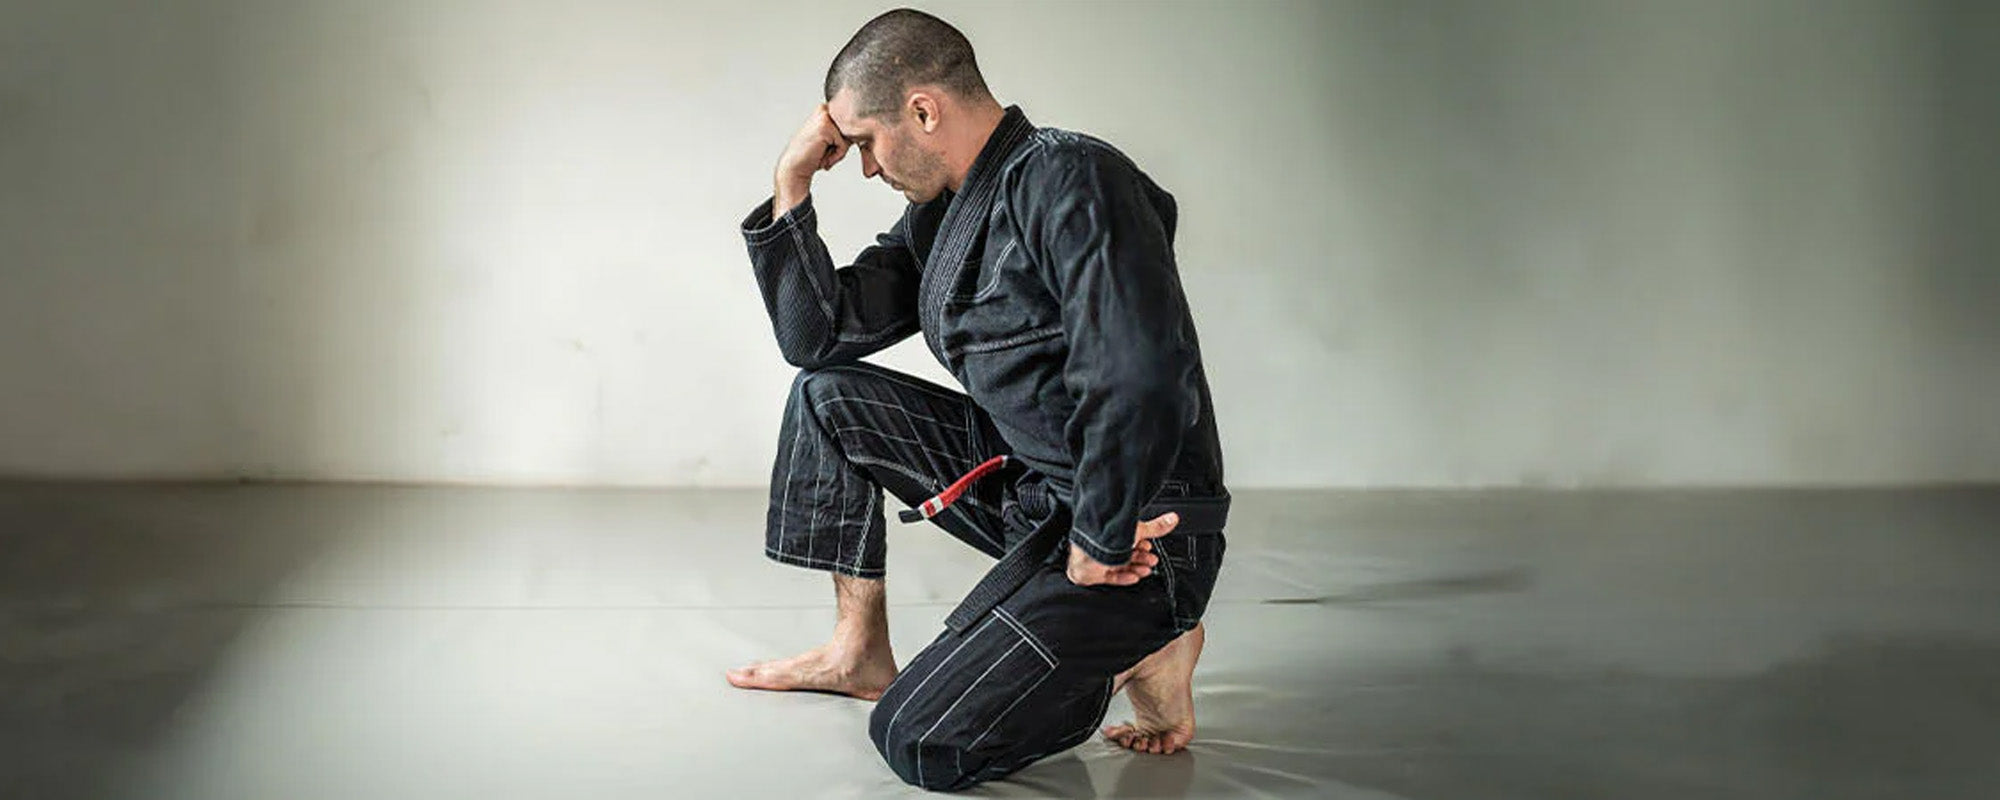 What to Do When You Don't Have Time to Train BJJ